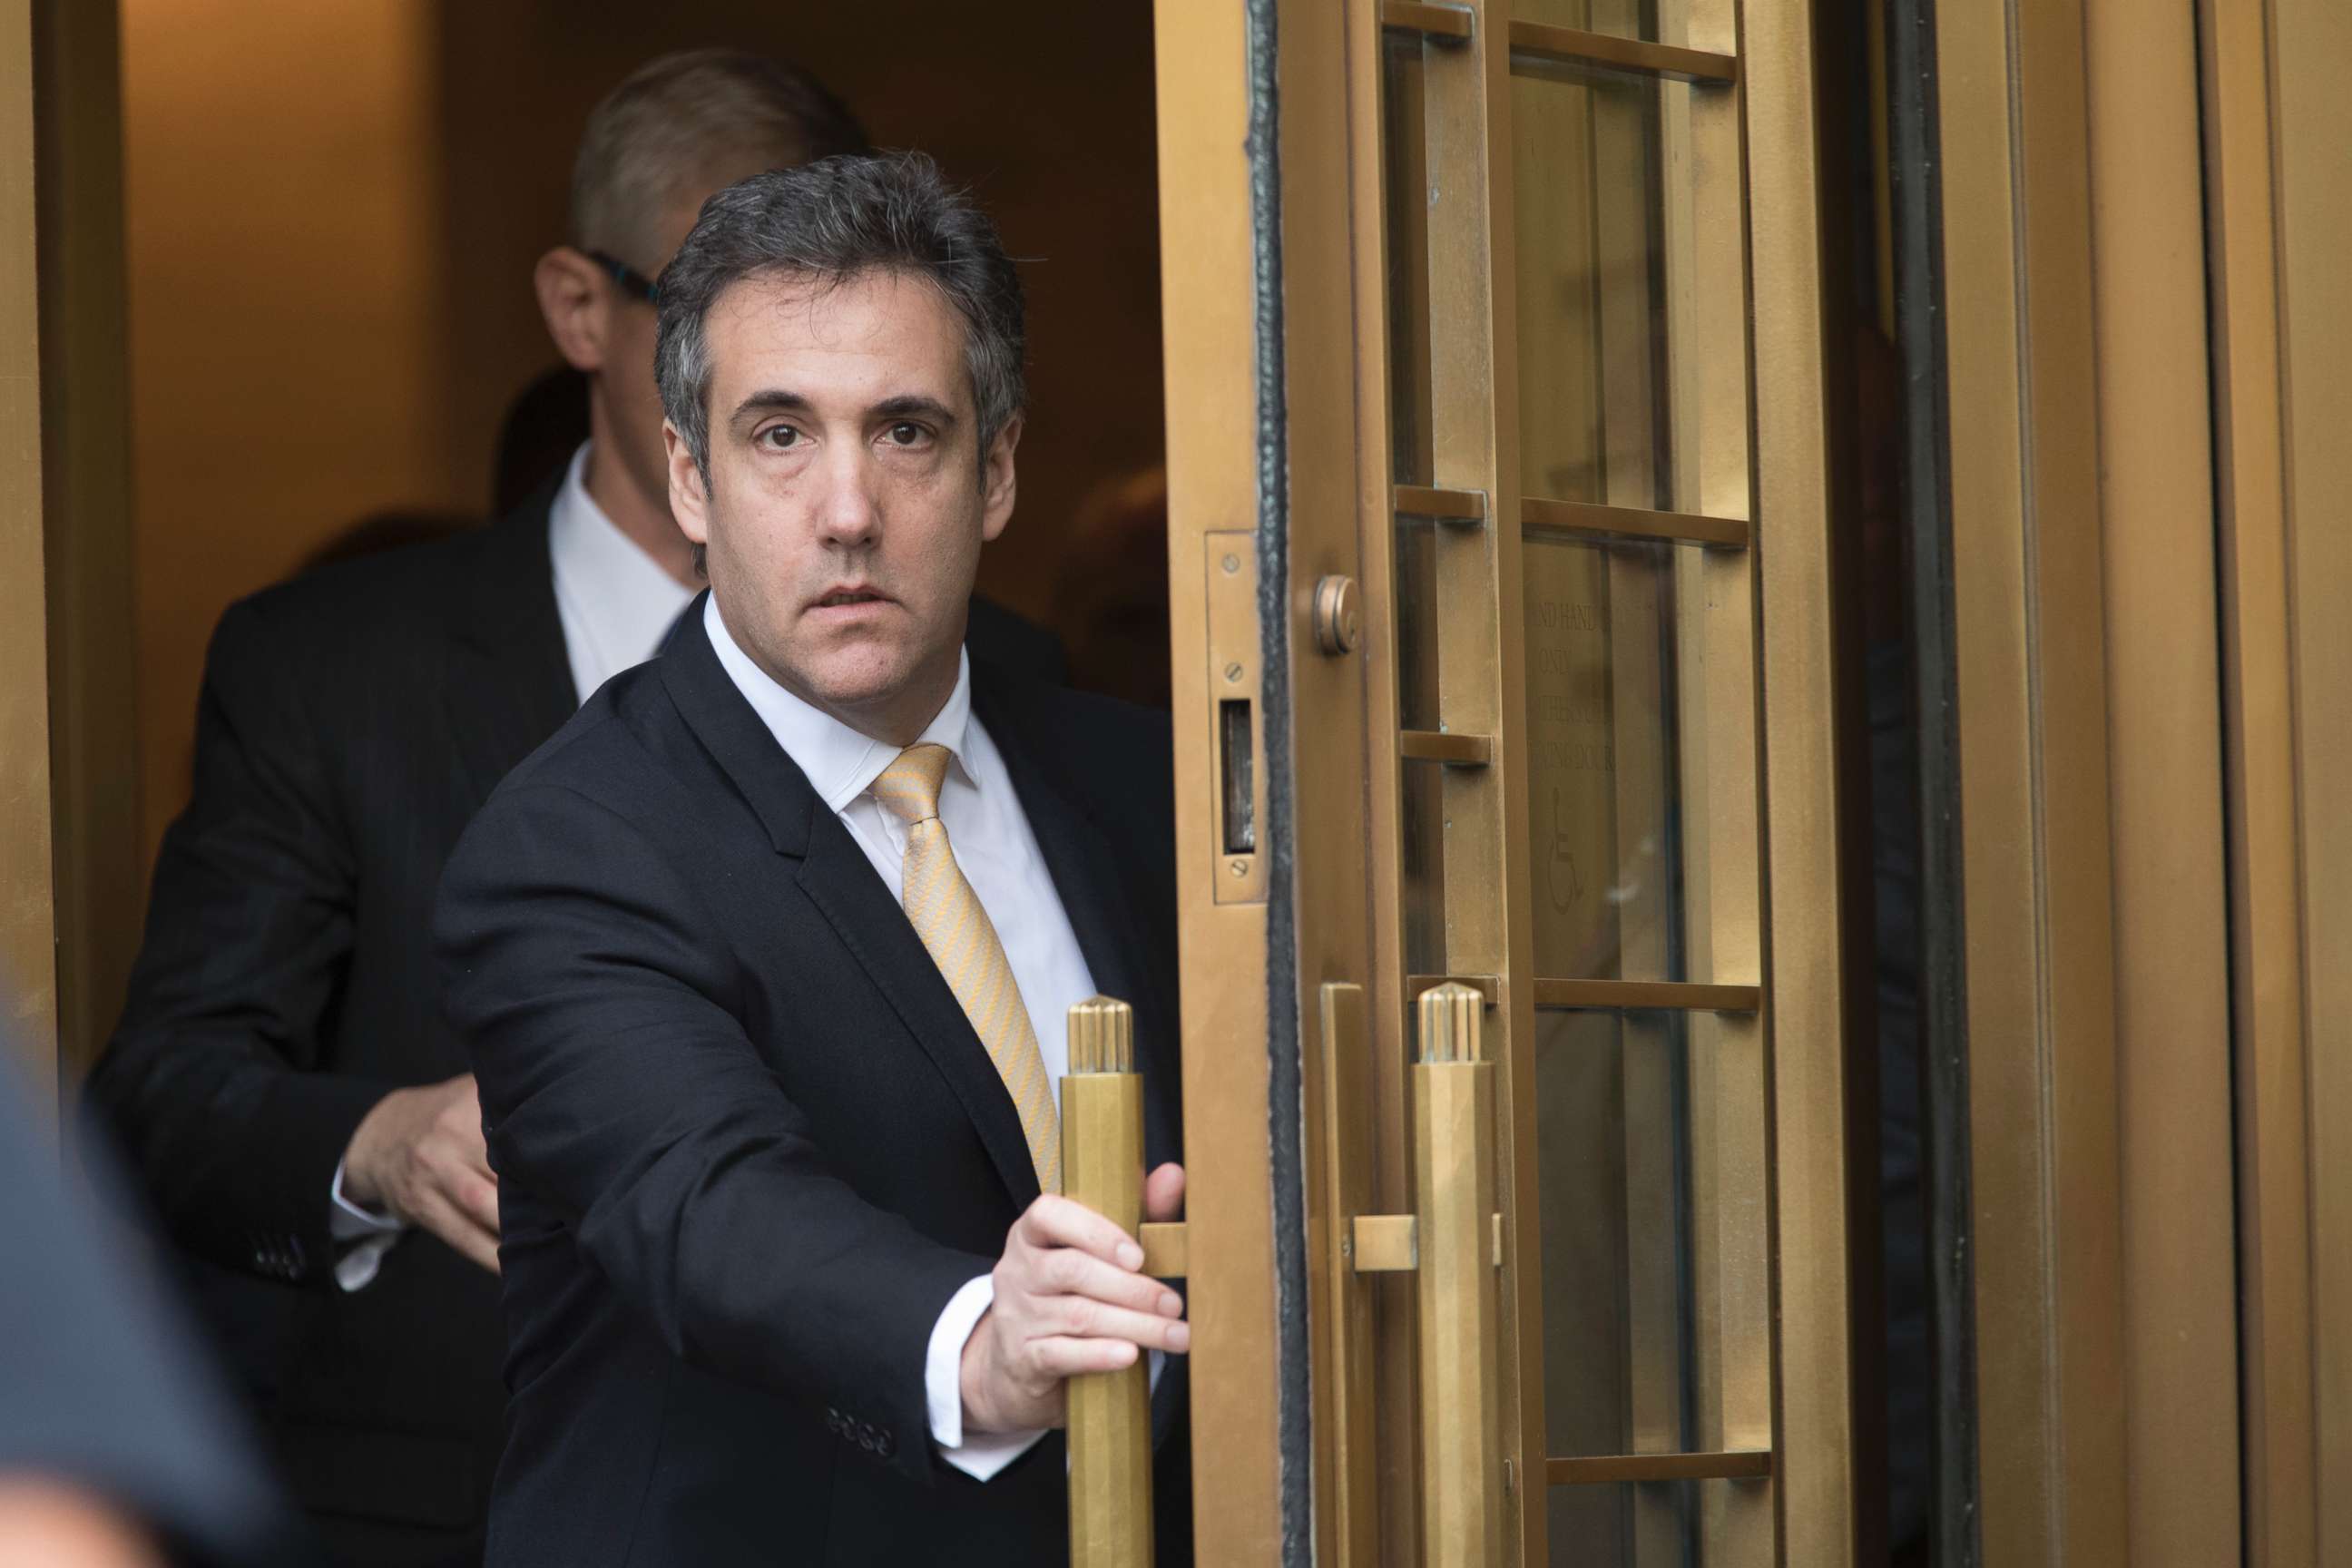 PHOTO: Michael Cohen leaves Federal court, Aug. 21, 2018, in New York City.